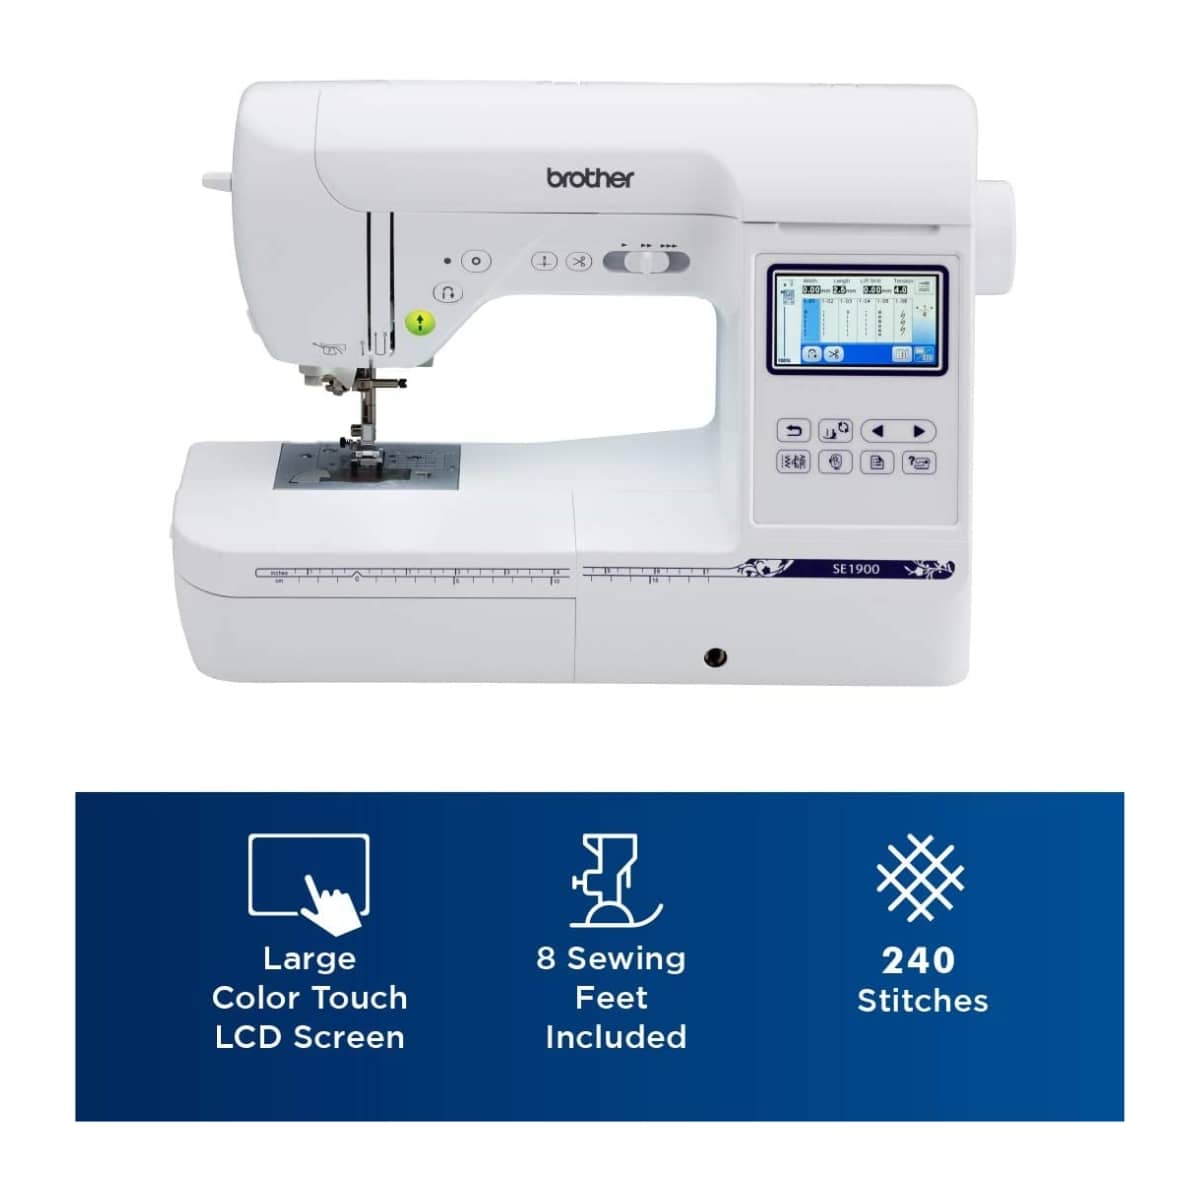 Brother SE1900 Sewing Machine Instruction Manual User Manual Complete User  Guide (Download Now) 